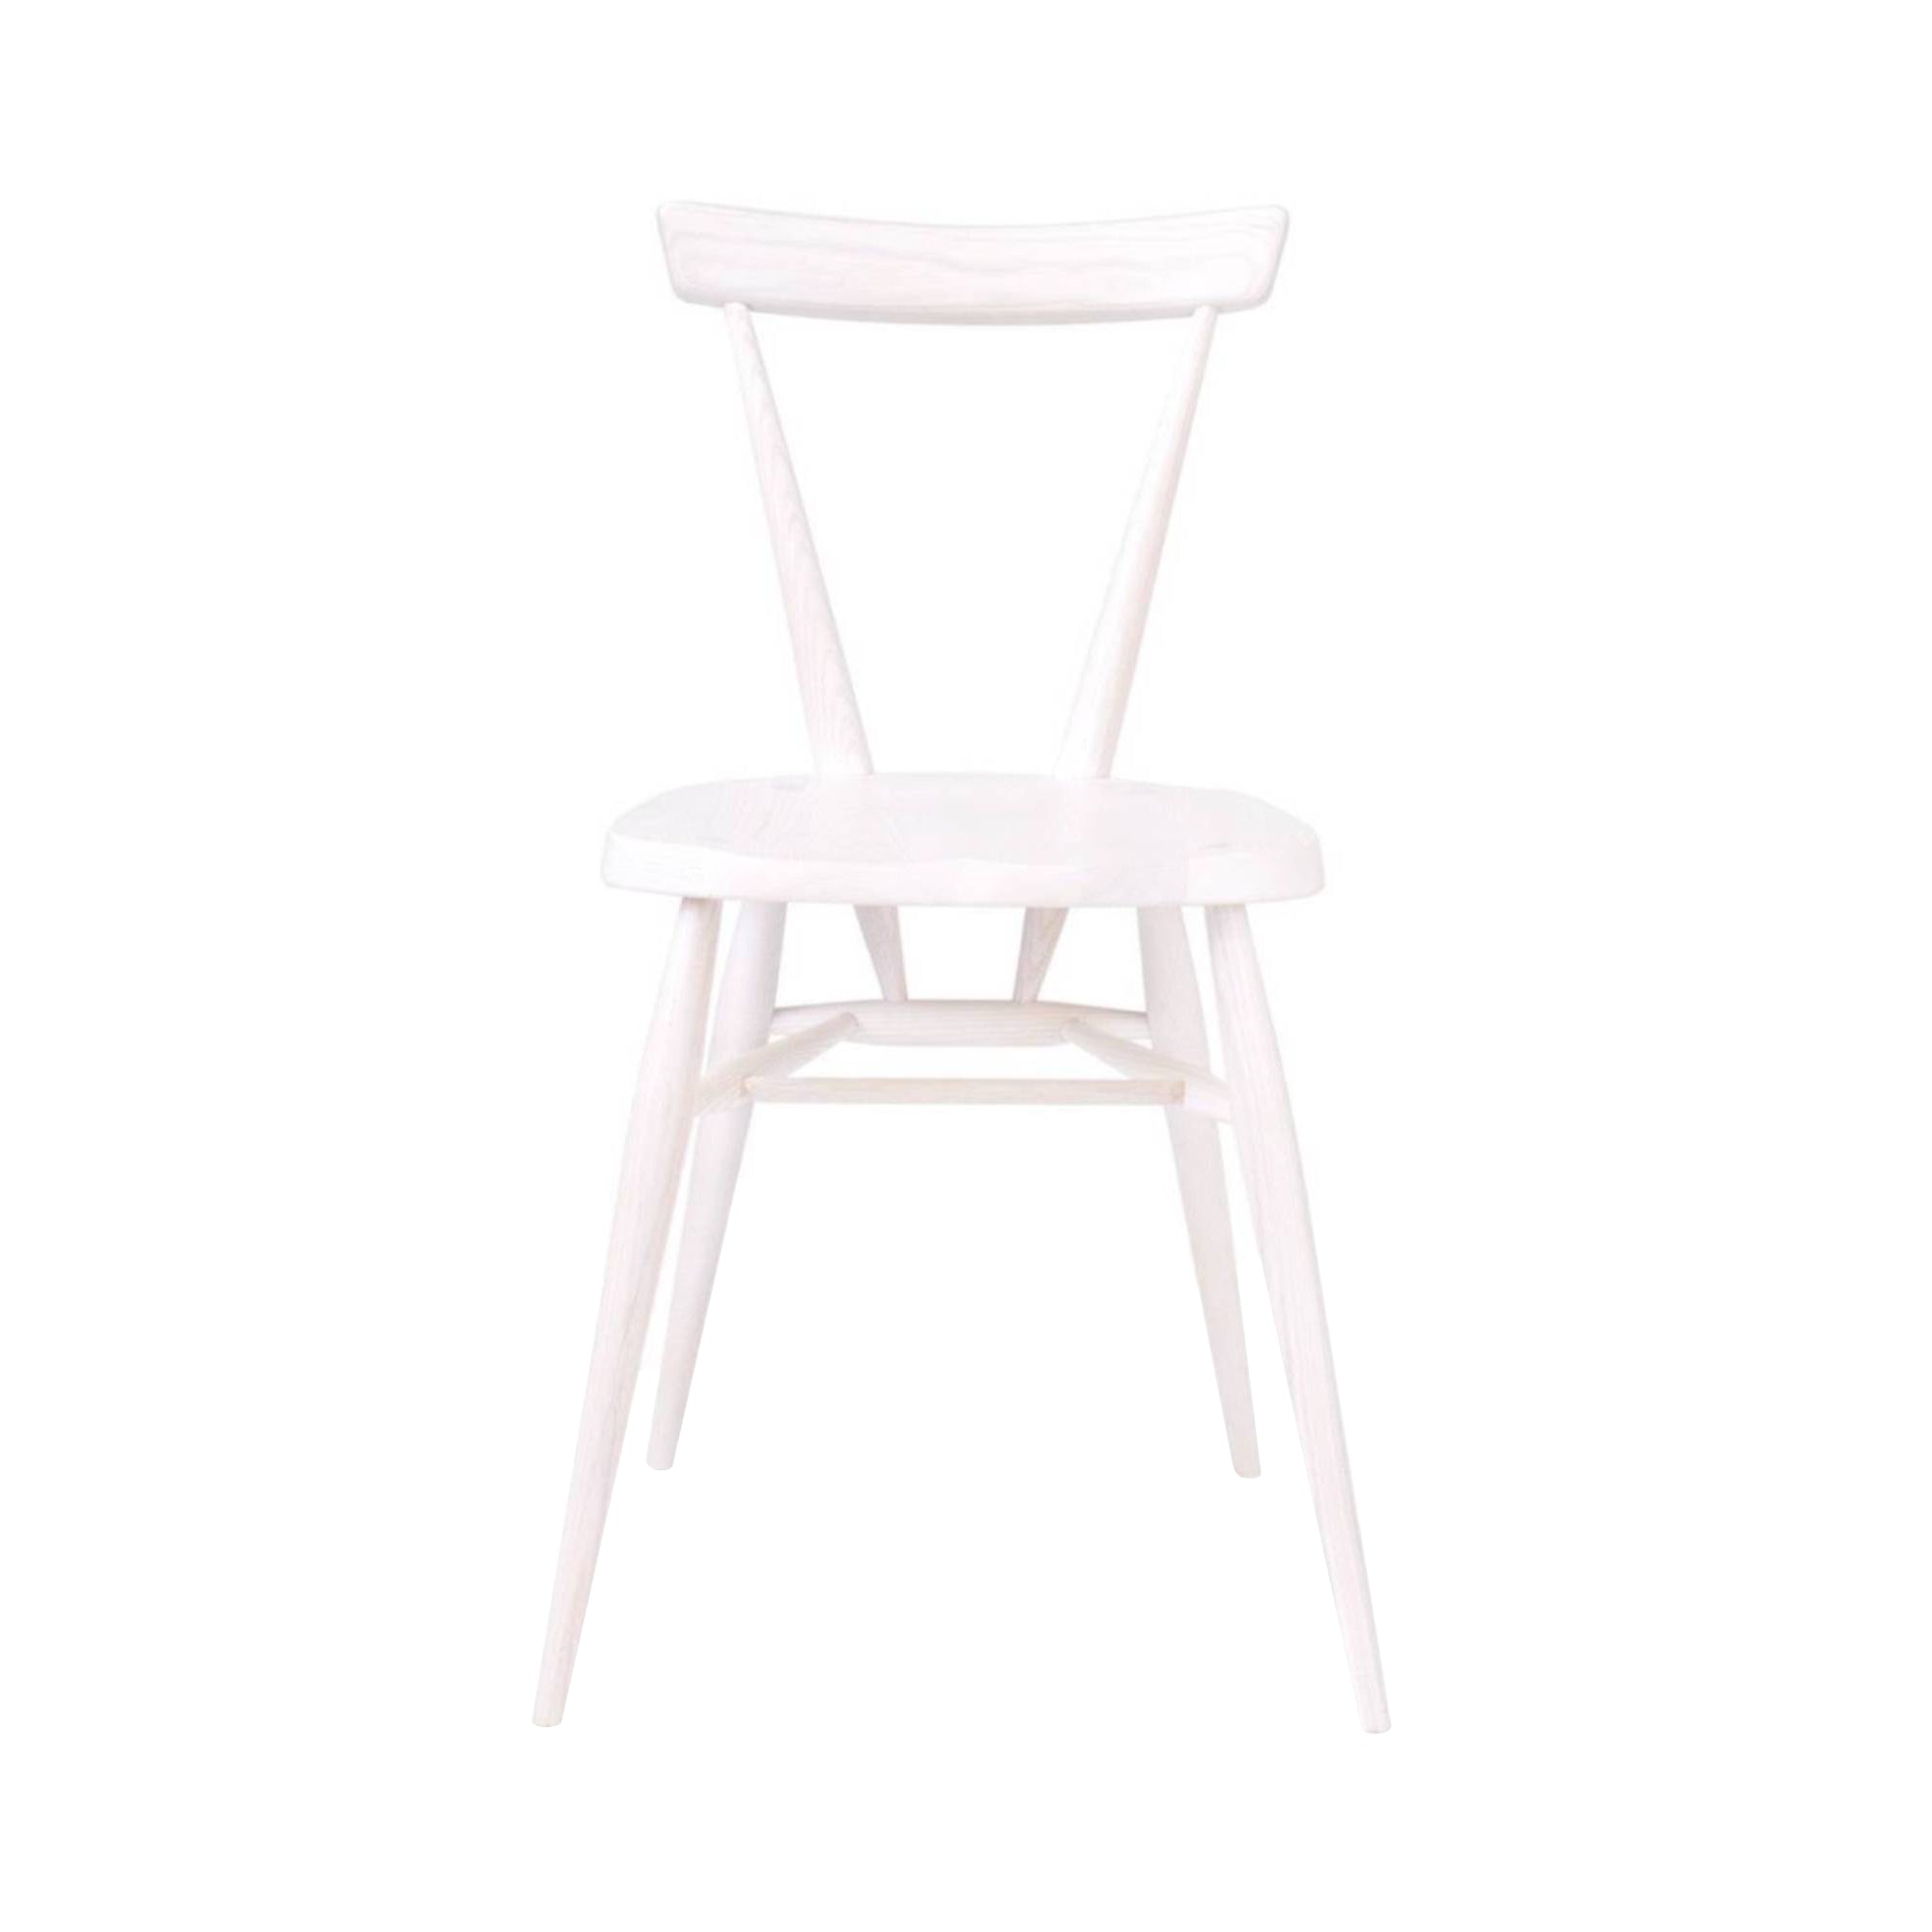 Originals Stacking Chair: Off White